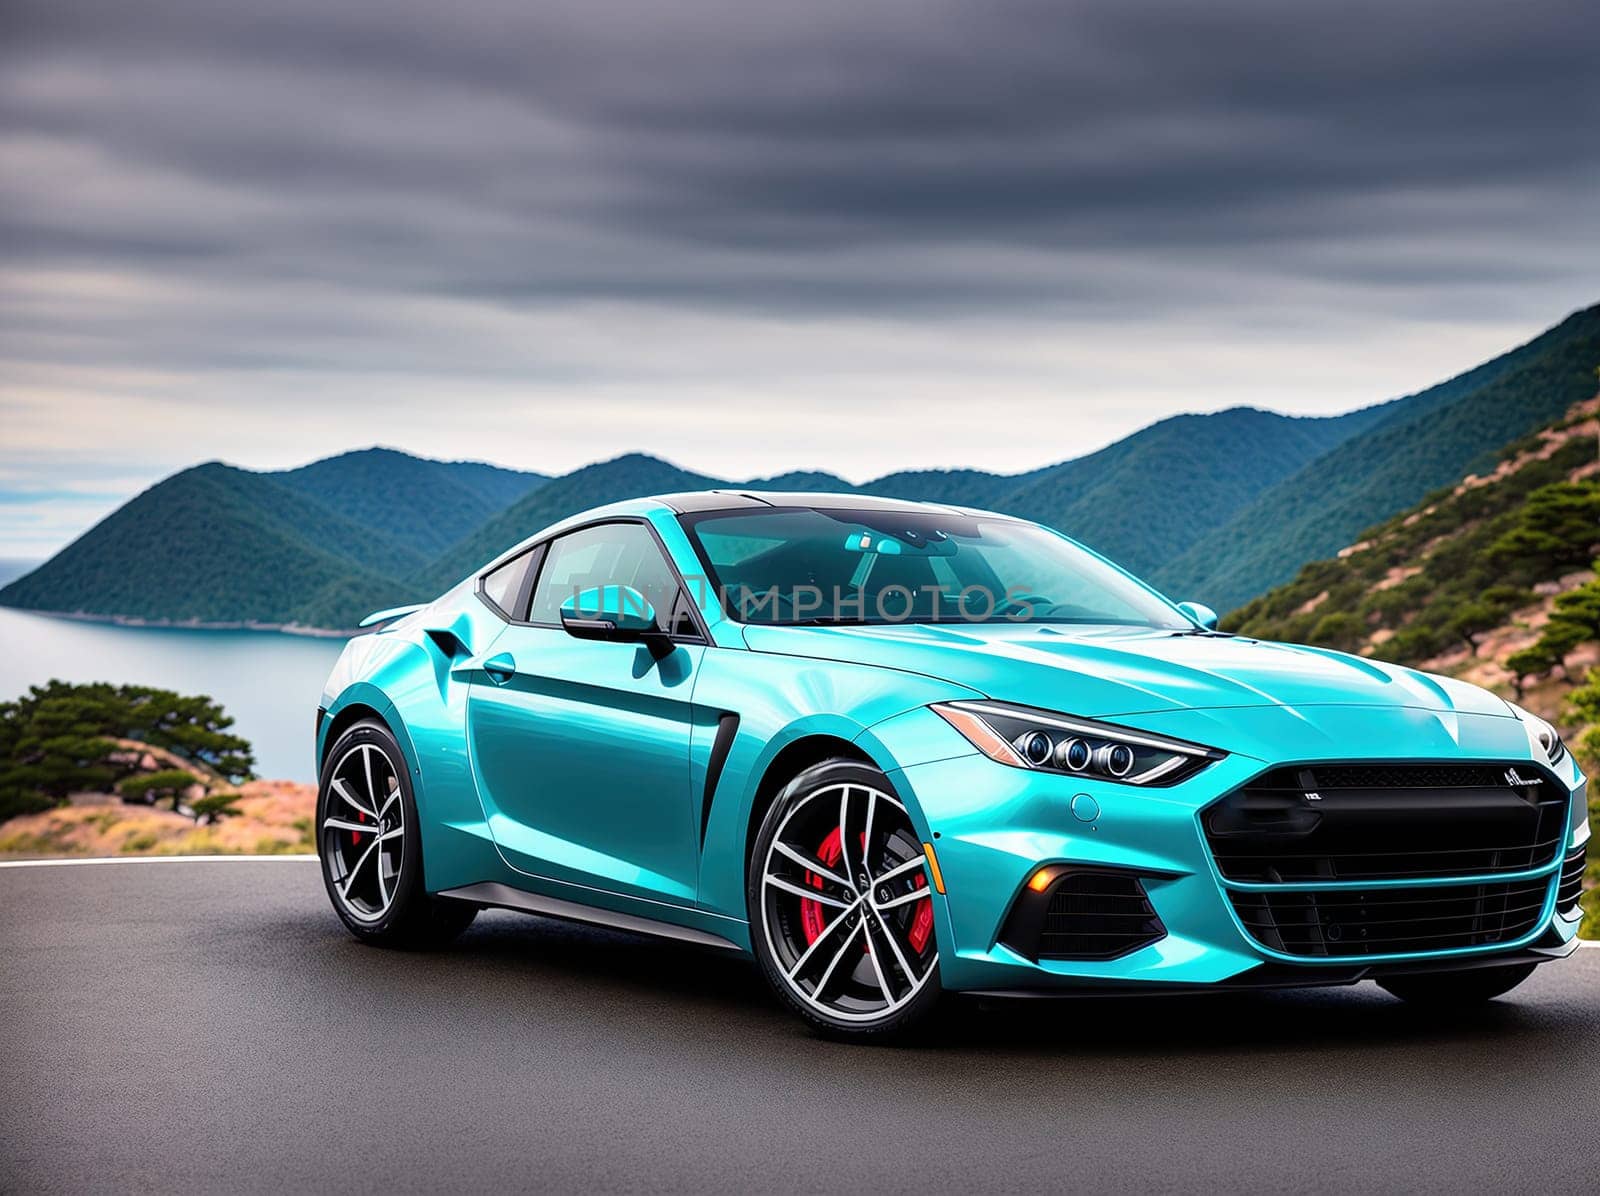 A blue sports car parked on the side of a winding road with mountains in the background. by creart